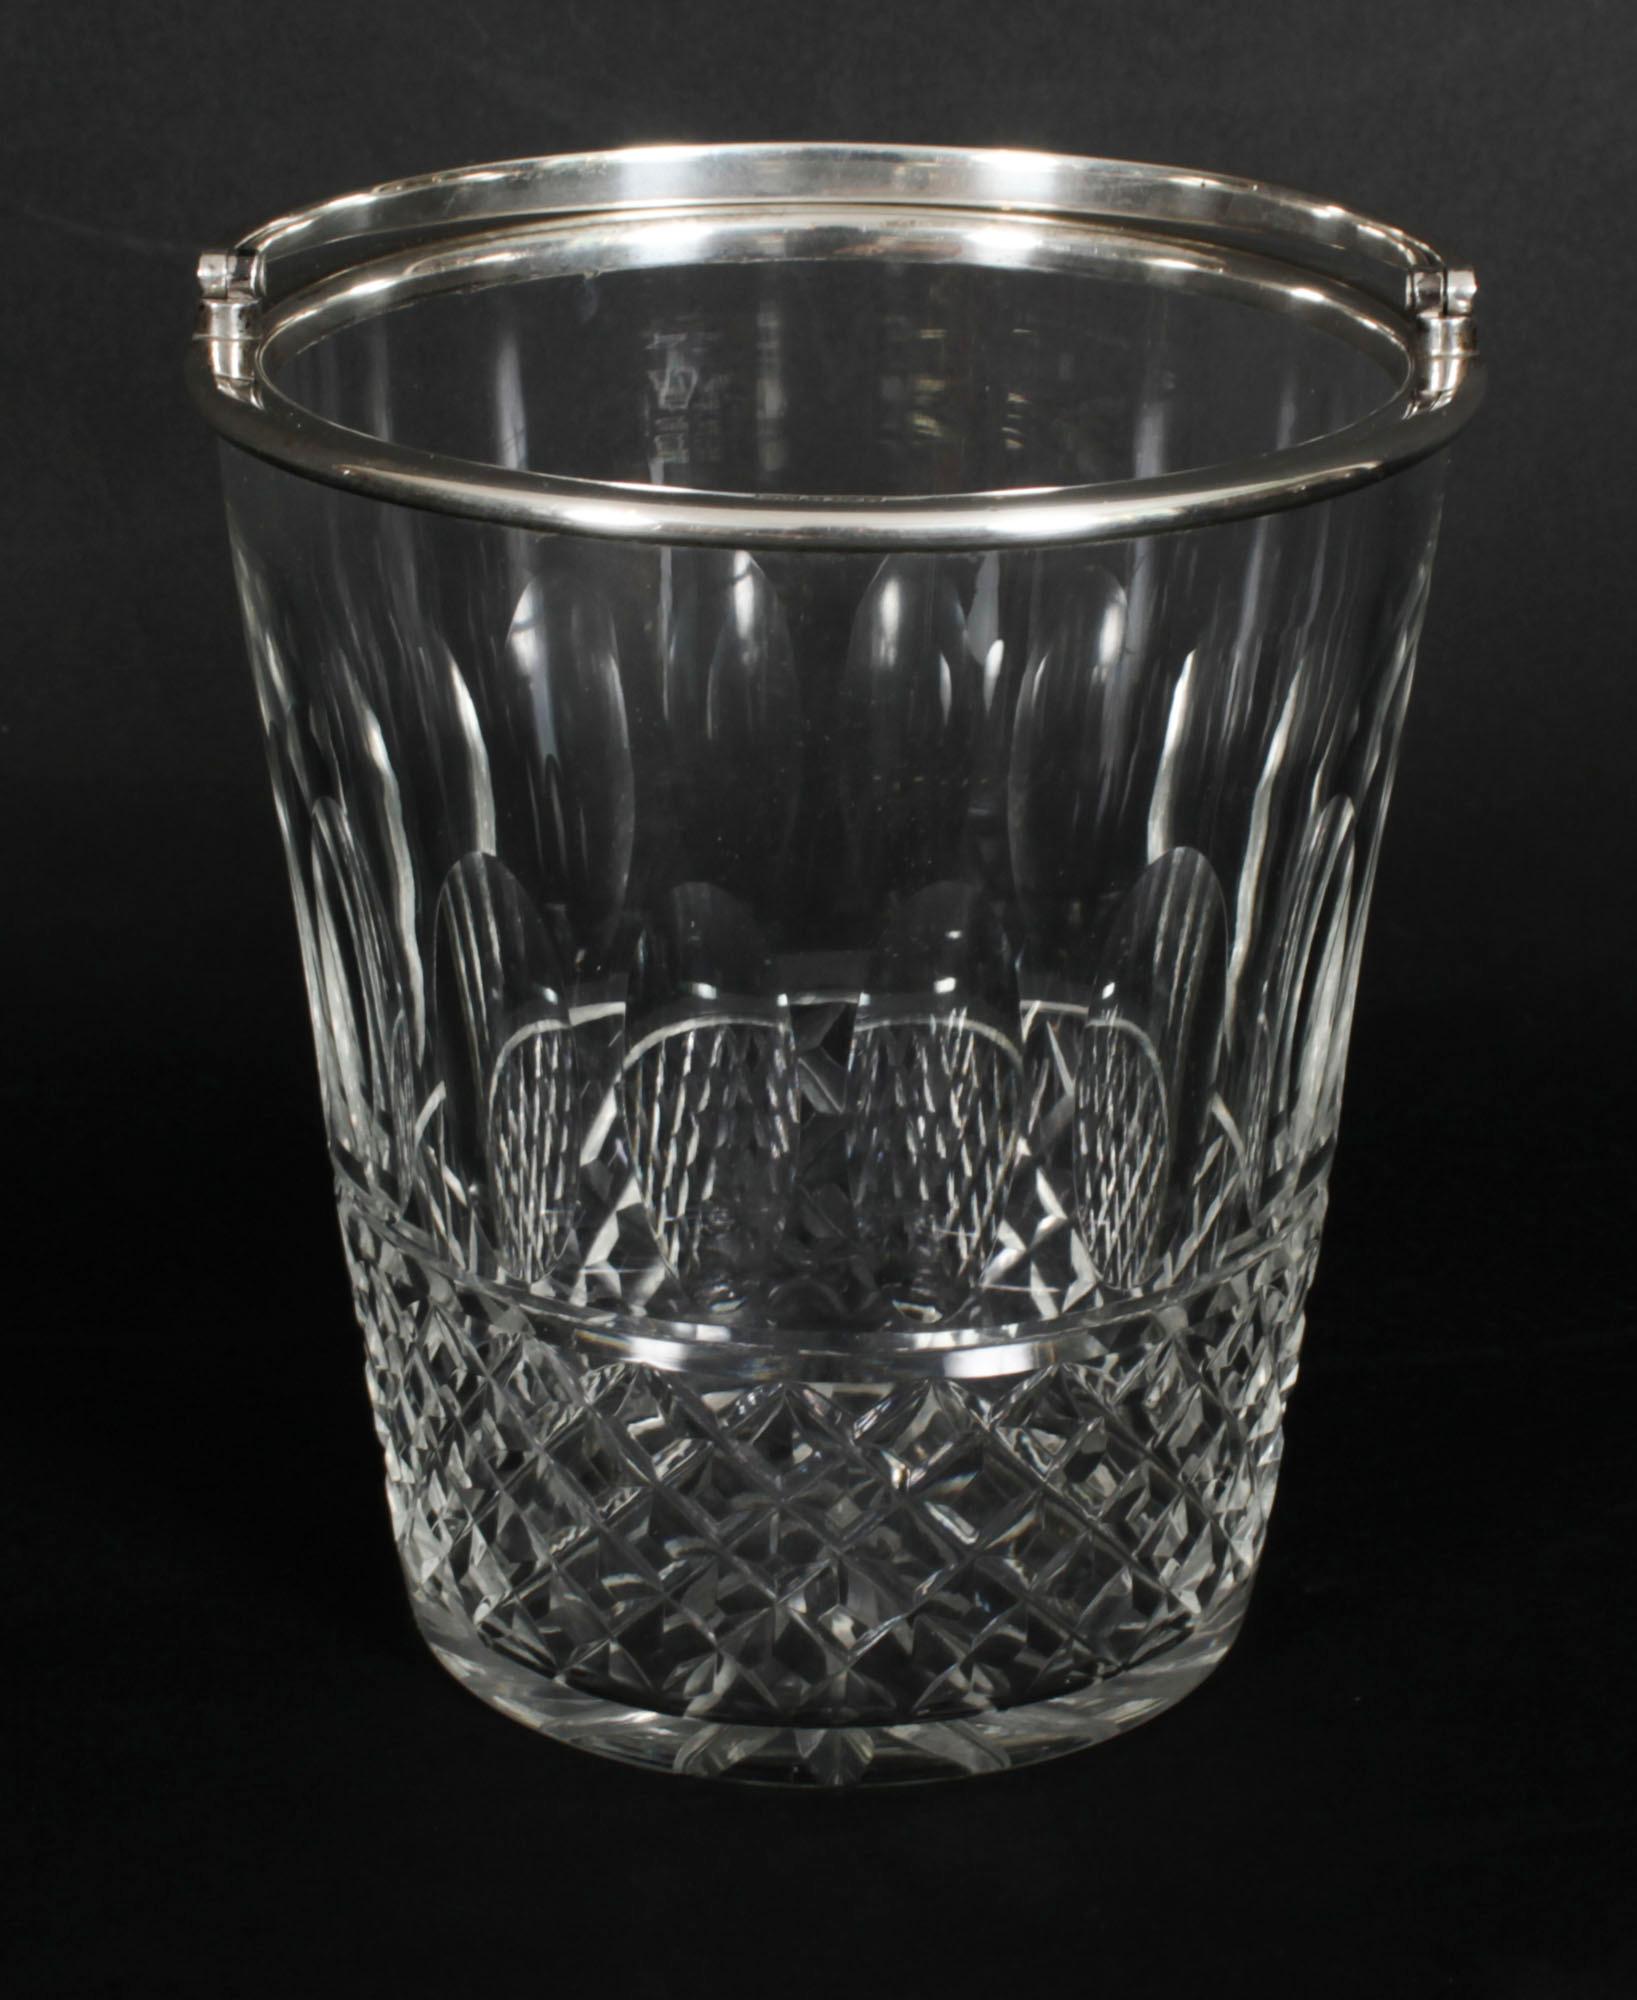 A superb vintage sterling silver mounted hobnail-cut clear cut glass ice bucket with swing handle and star cut base.

The ice bucket fully marked, with hallmarks for Birmingham 1988.

There is no mistaking it's unique quality and design which is